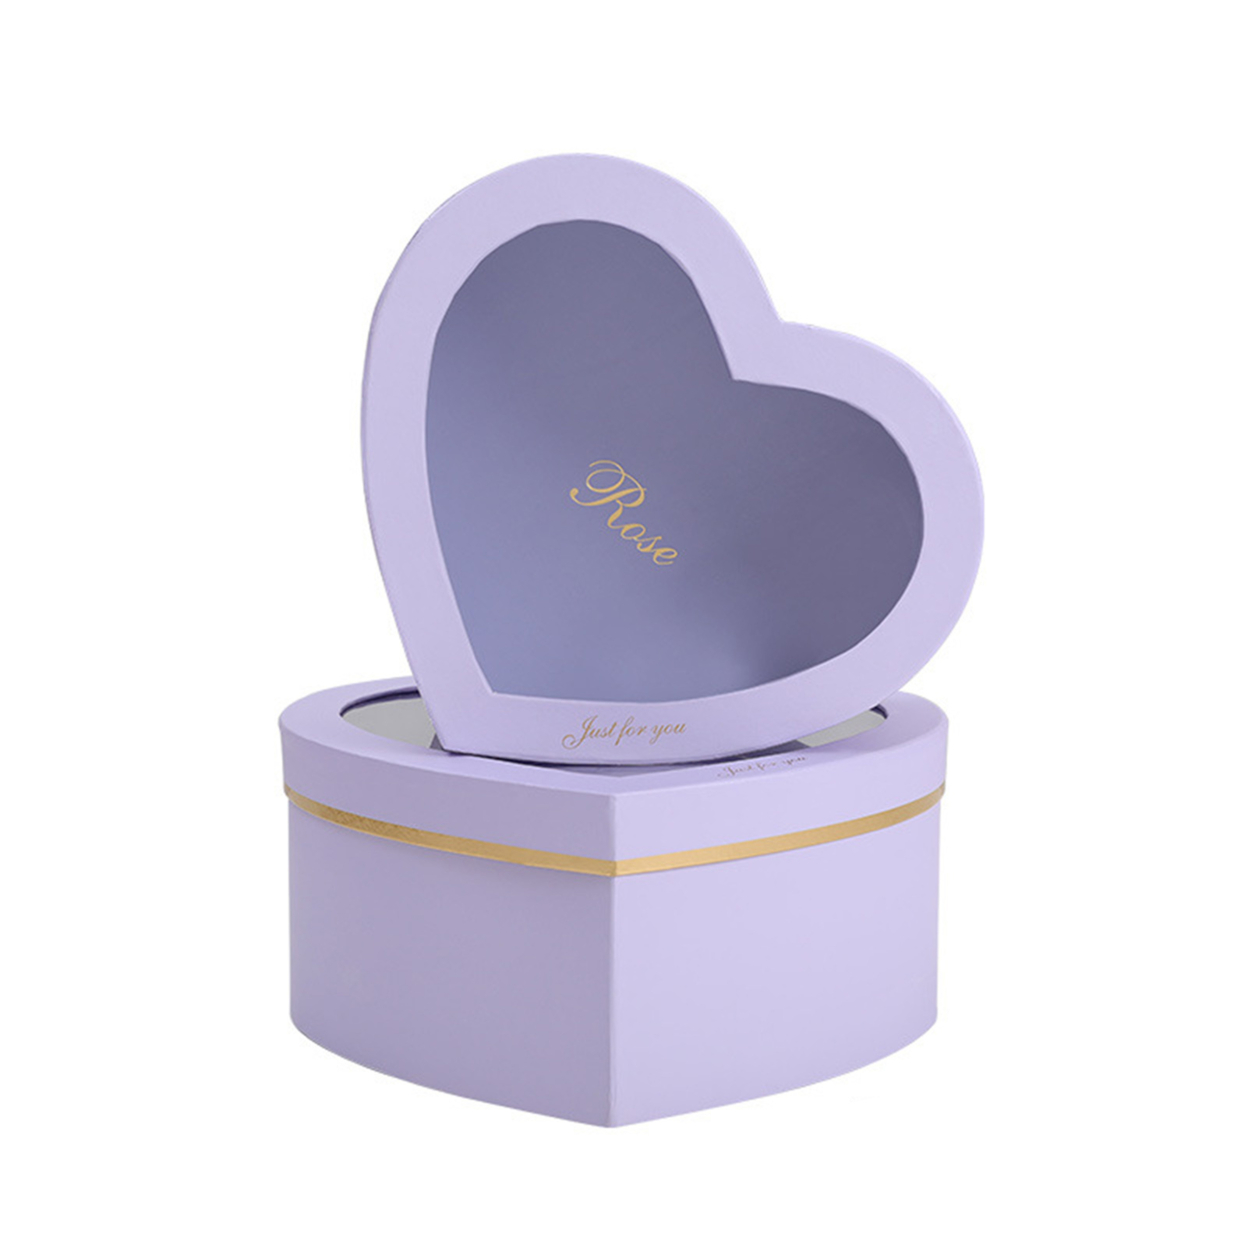 2Pcs/Set Flower Box Heart Shaped Hot Stamping Paper Florist Packaging Rose Gift Case for Party - light purple